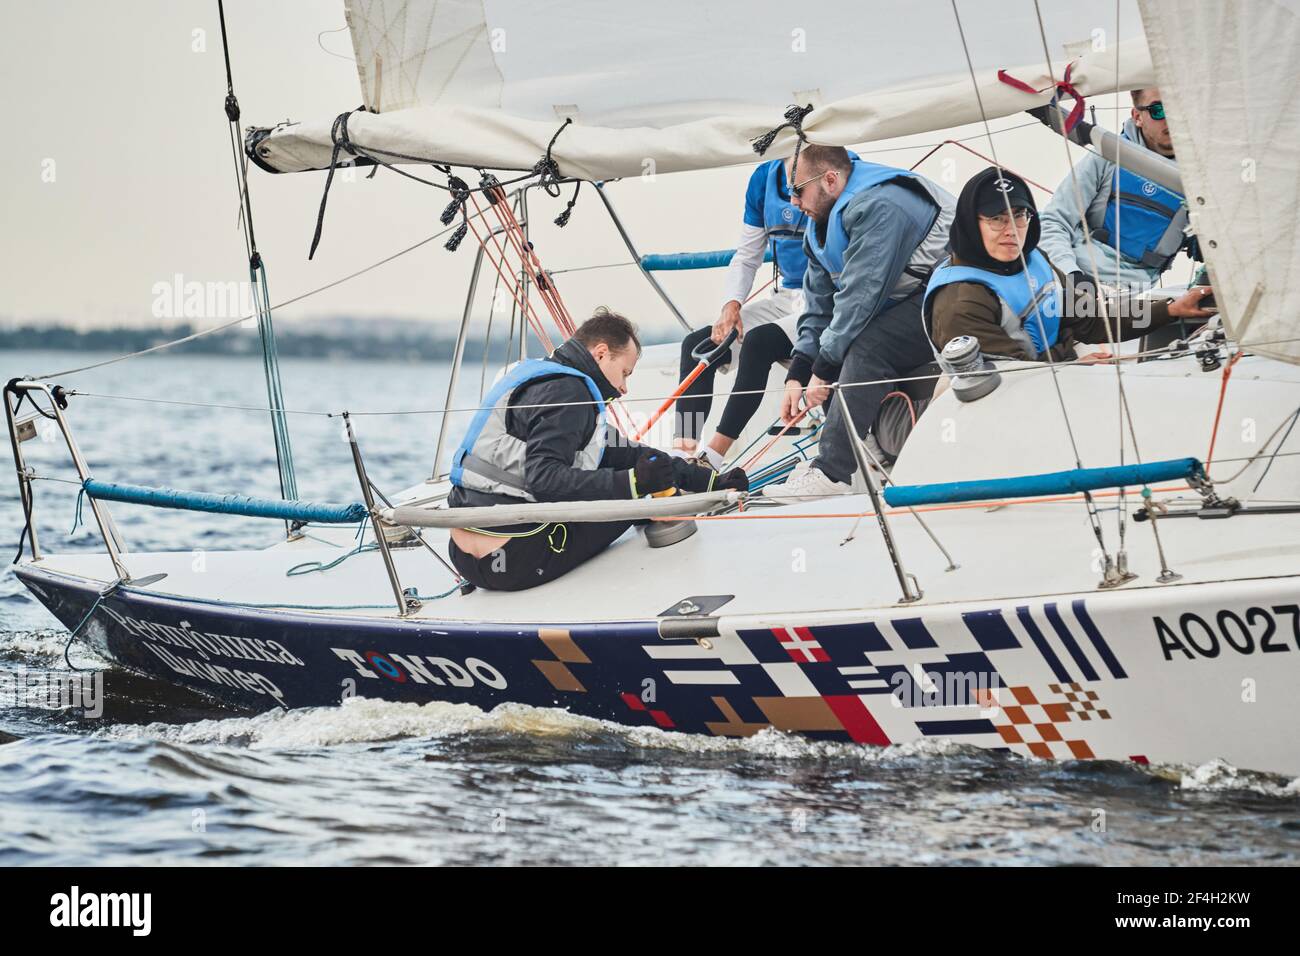 Russia, St.Petersburg, 05 September 2020: Participants of a sailing regatta on the sailboat, pull ropes, water splashes in the foreground, focus on Stock Photo